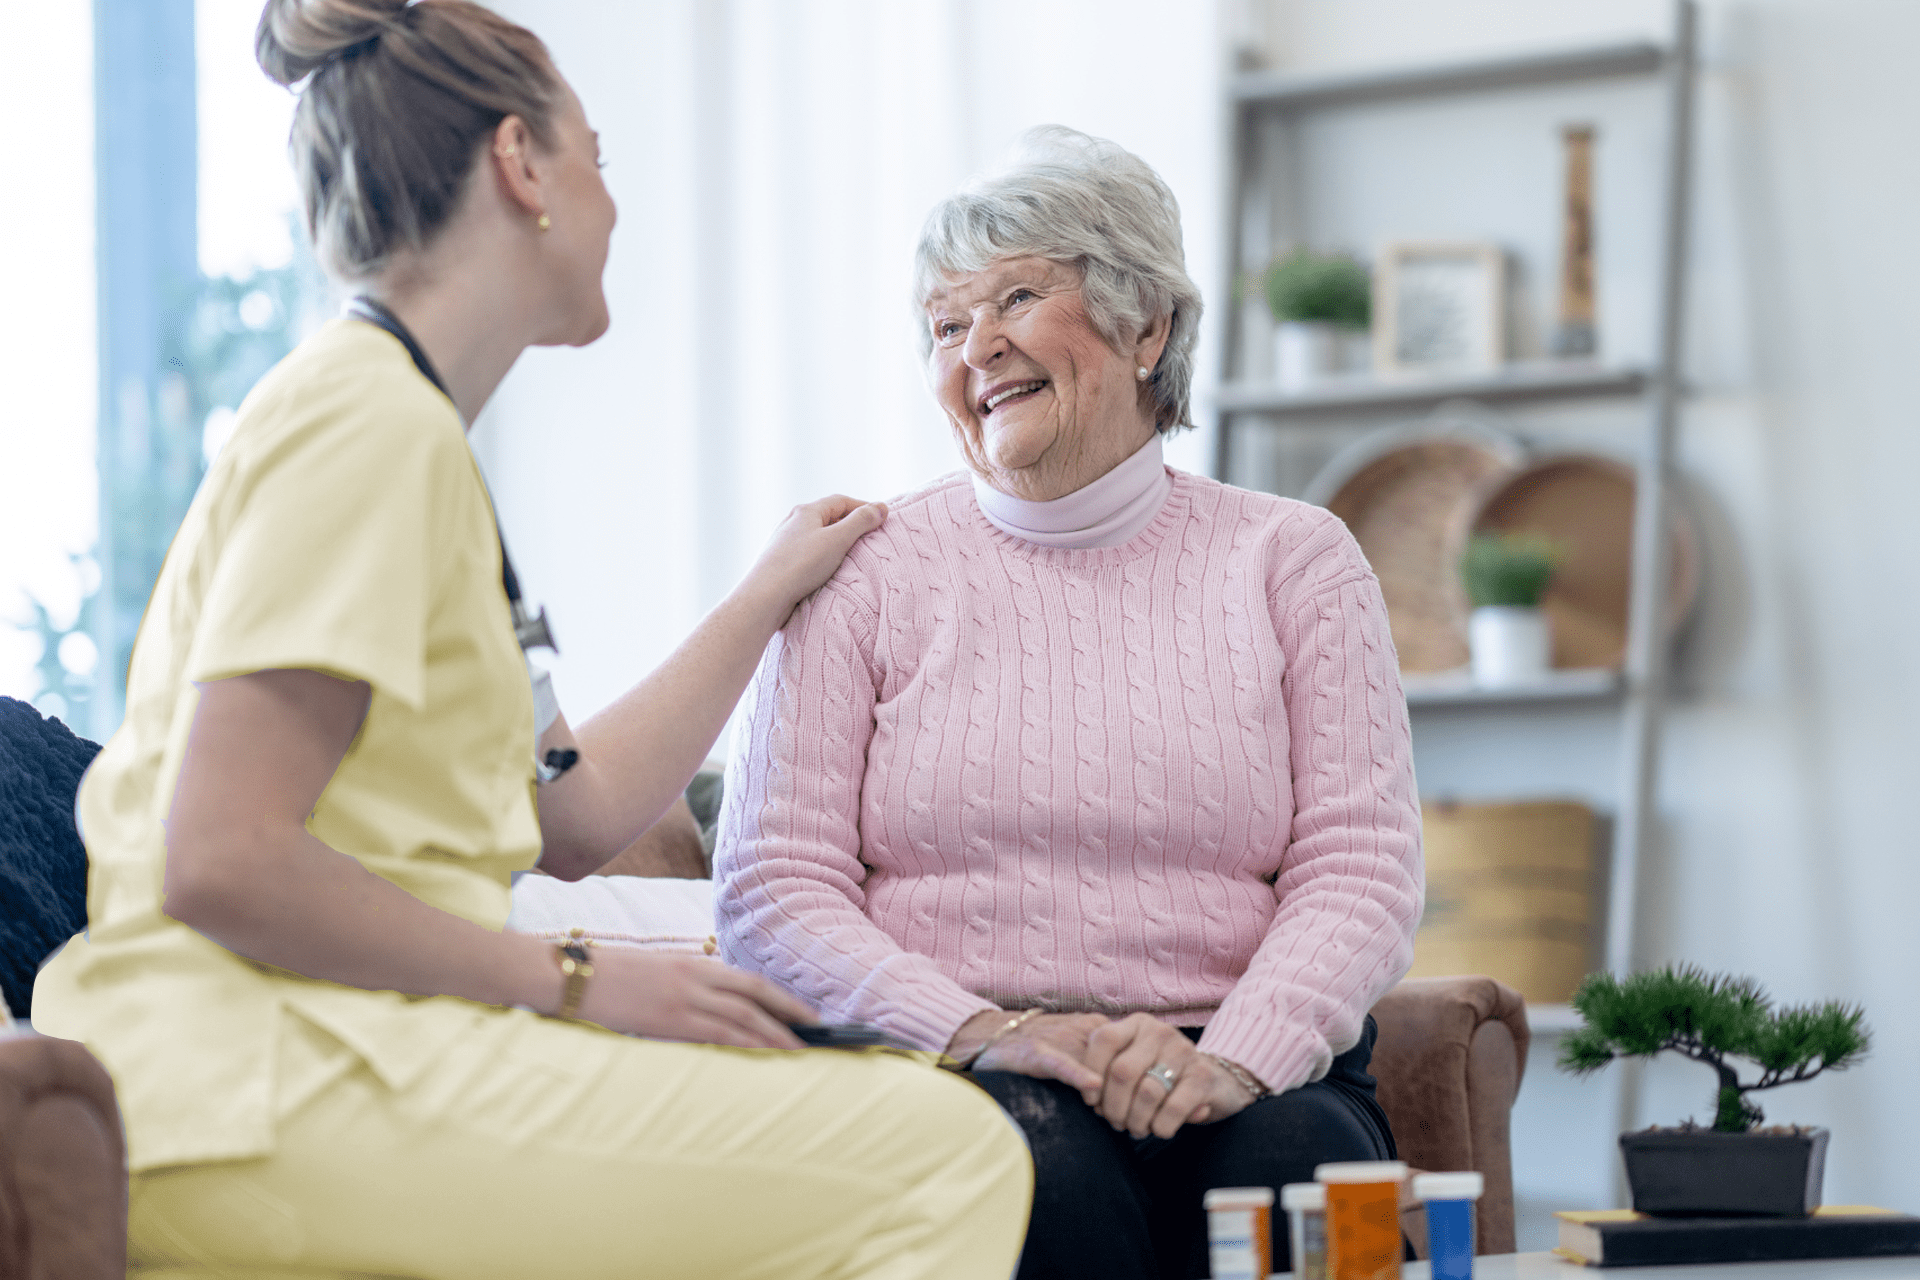 Take a break: the importance of respite care to caregivers